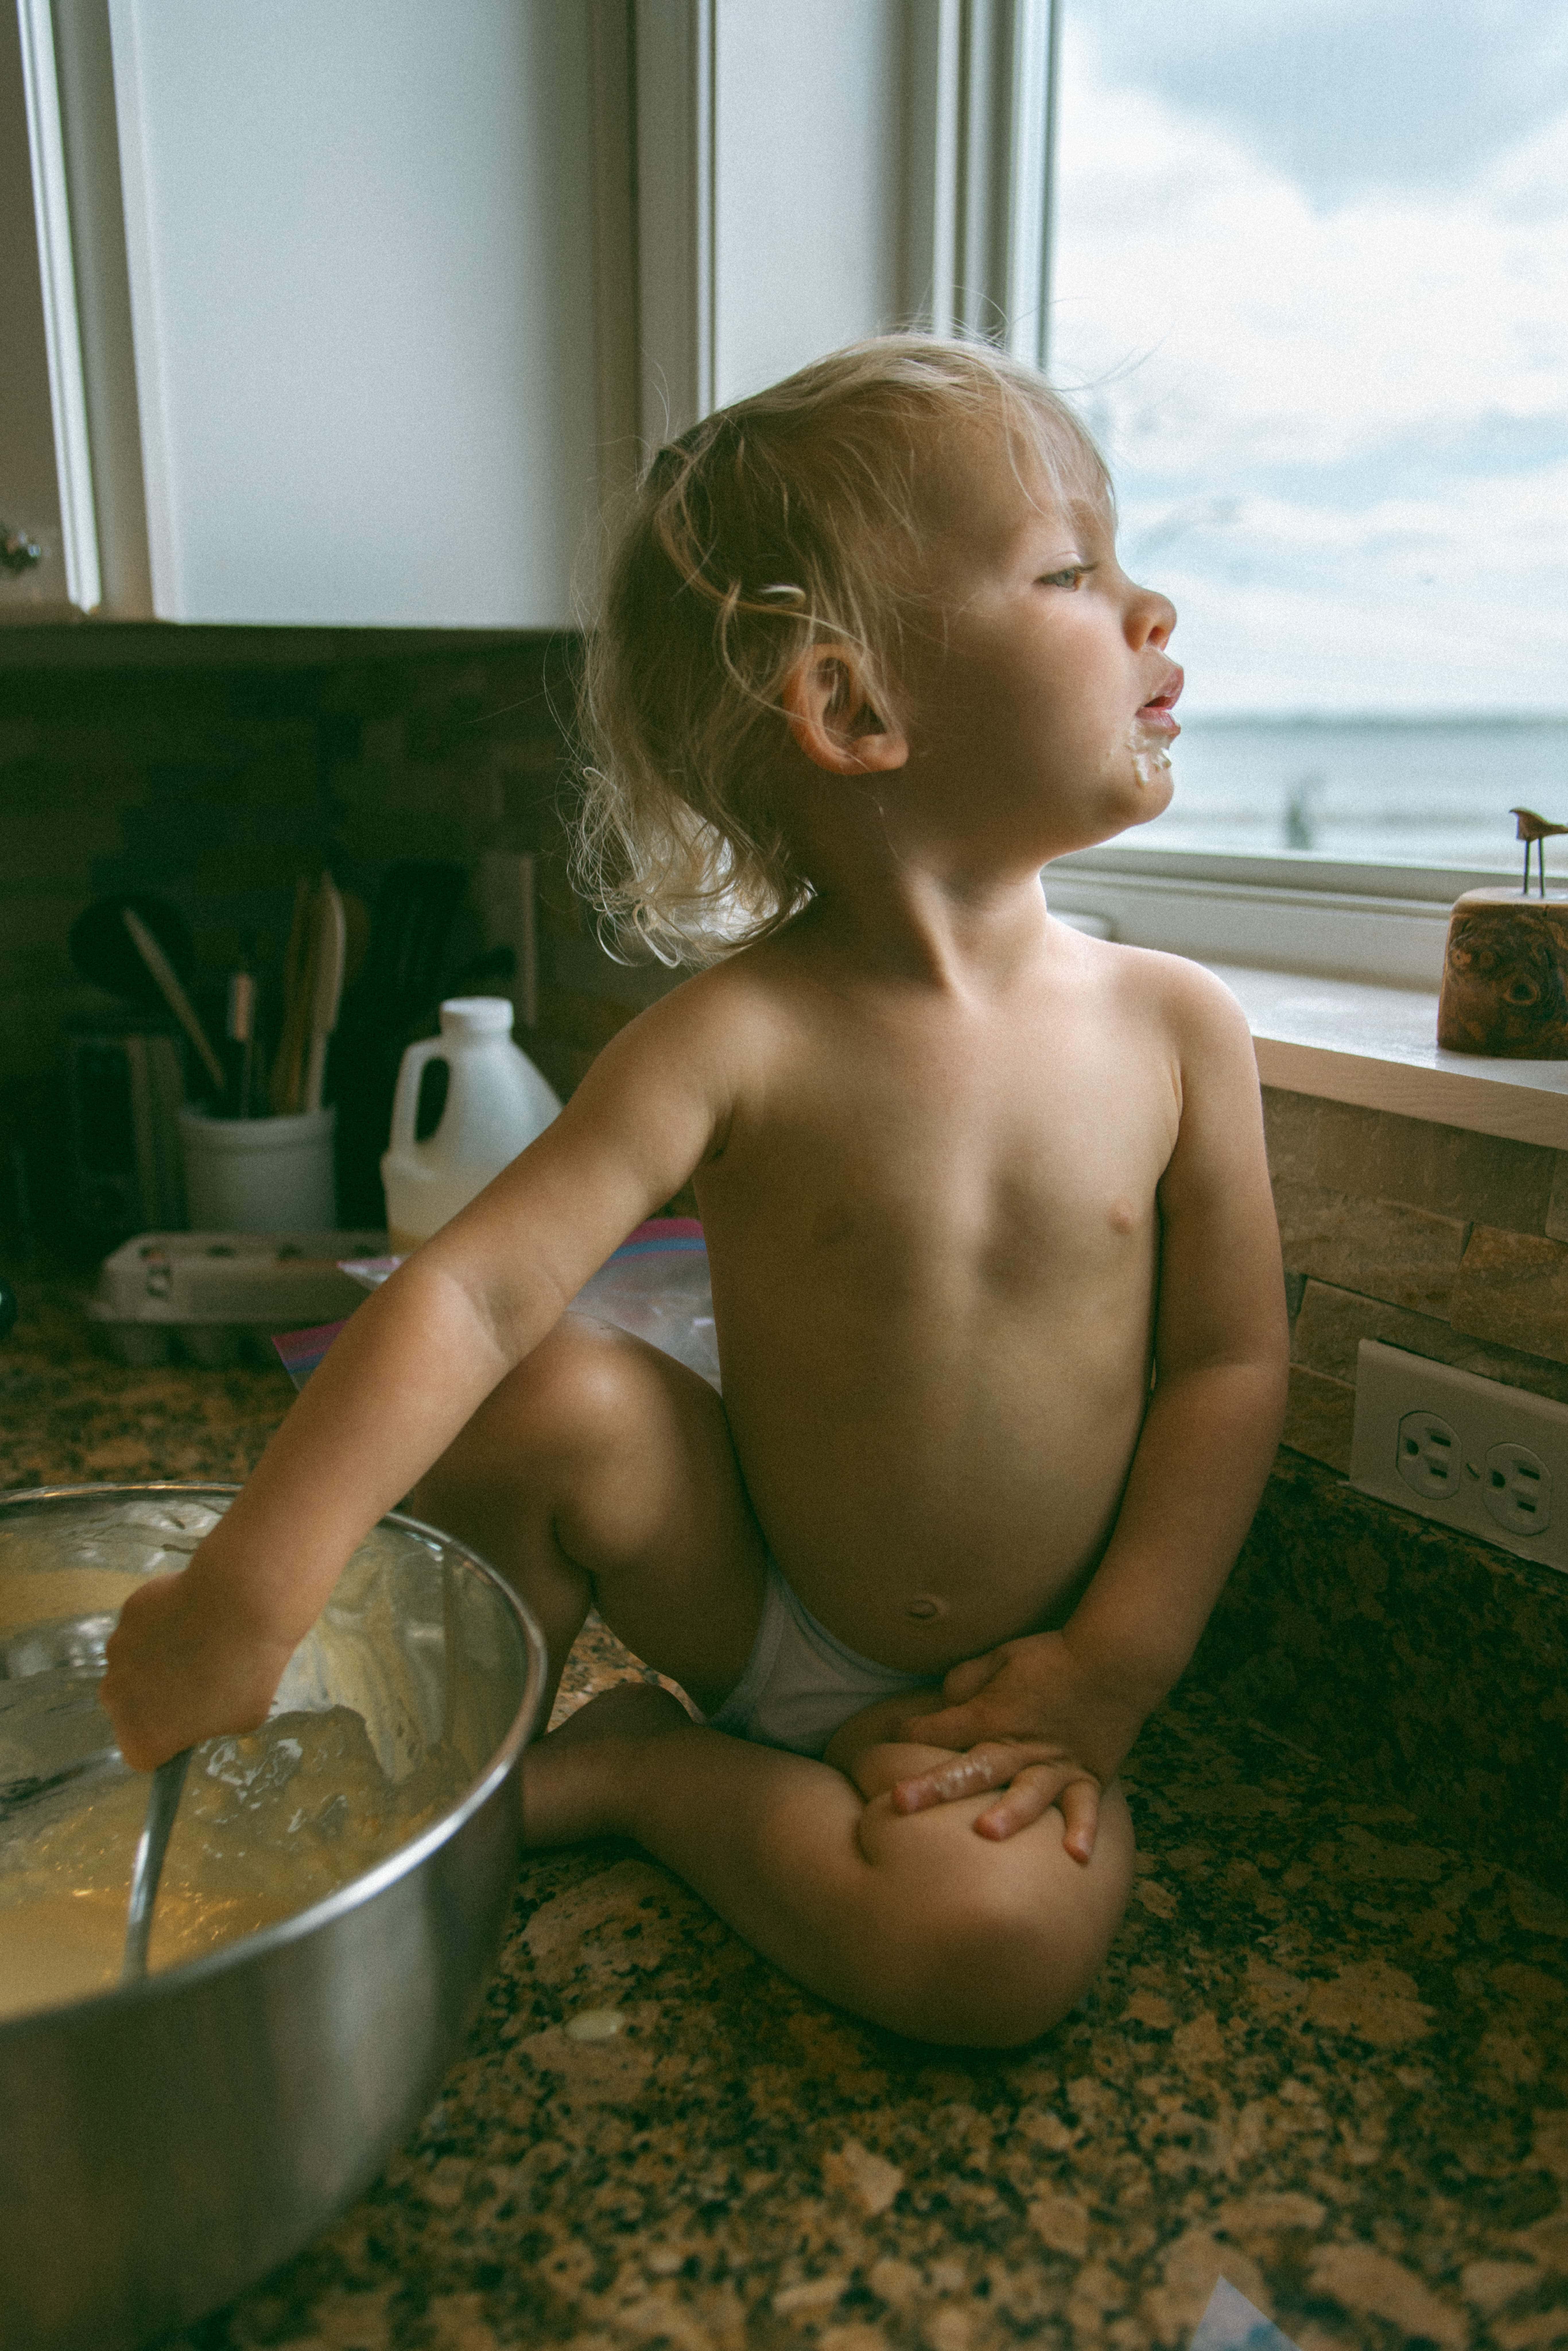 baby on the counter and looking out the window during breastfeeding photography session